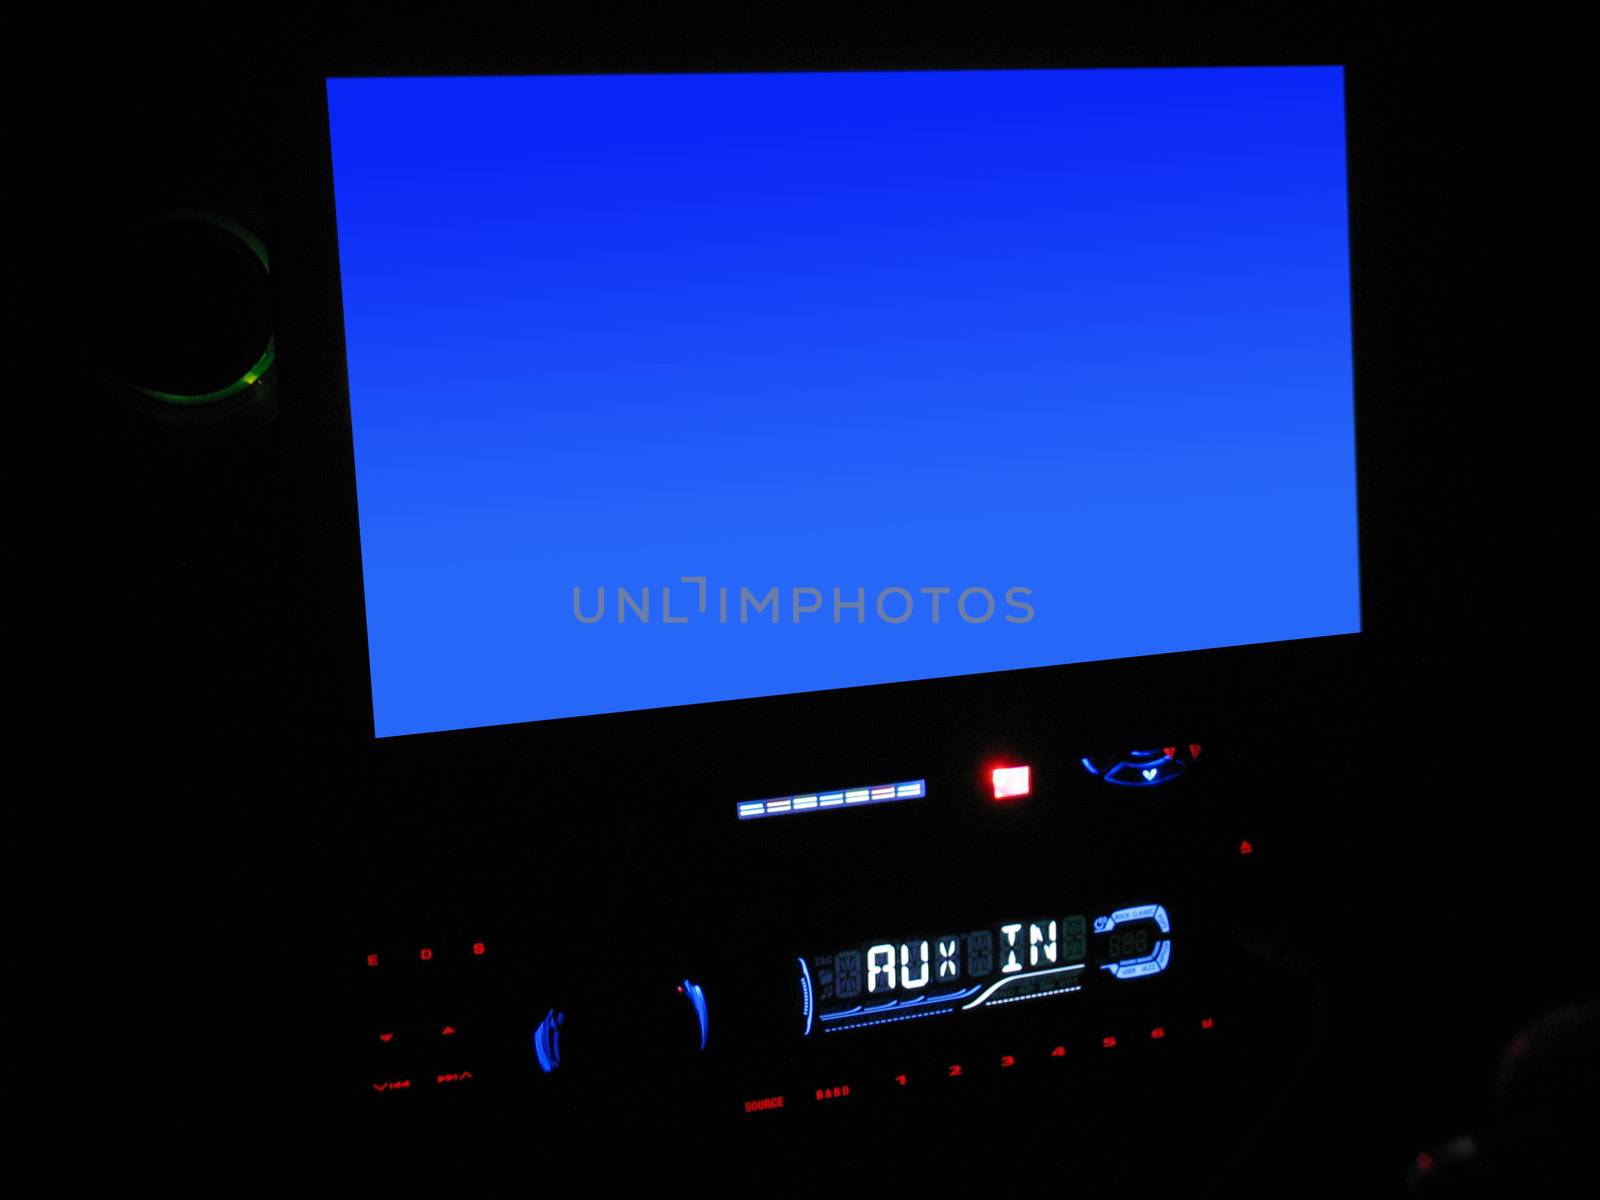 An in dash entertainment system which includes tv, dvd, and mp3 player.  

Includes CLIPPING PATH for the screen area.  Place any image you want on the screen, easily - or just leave it blue.